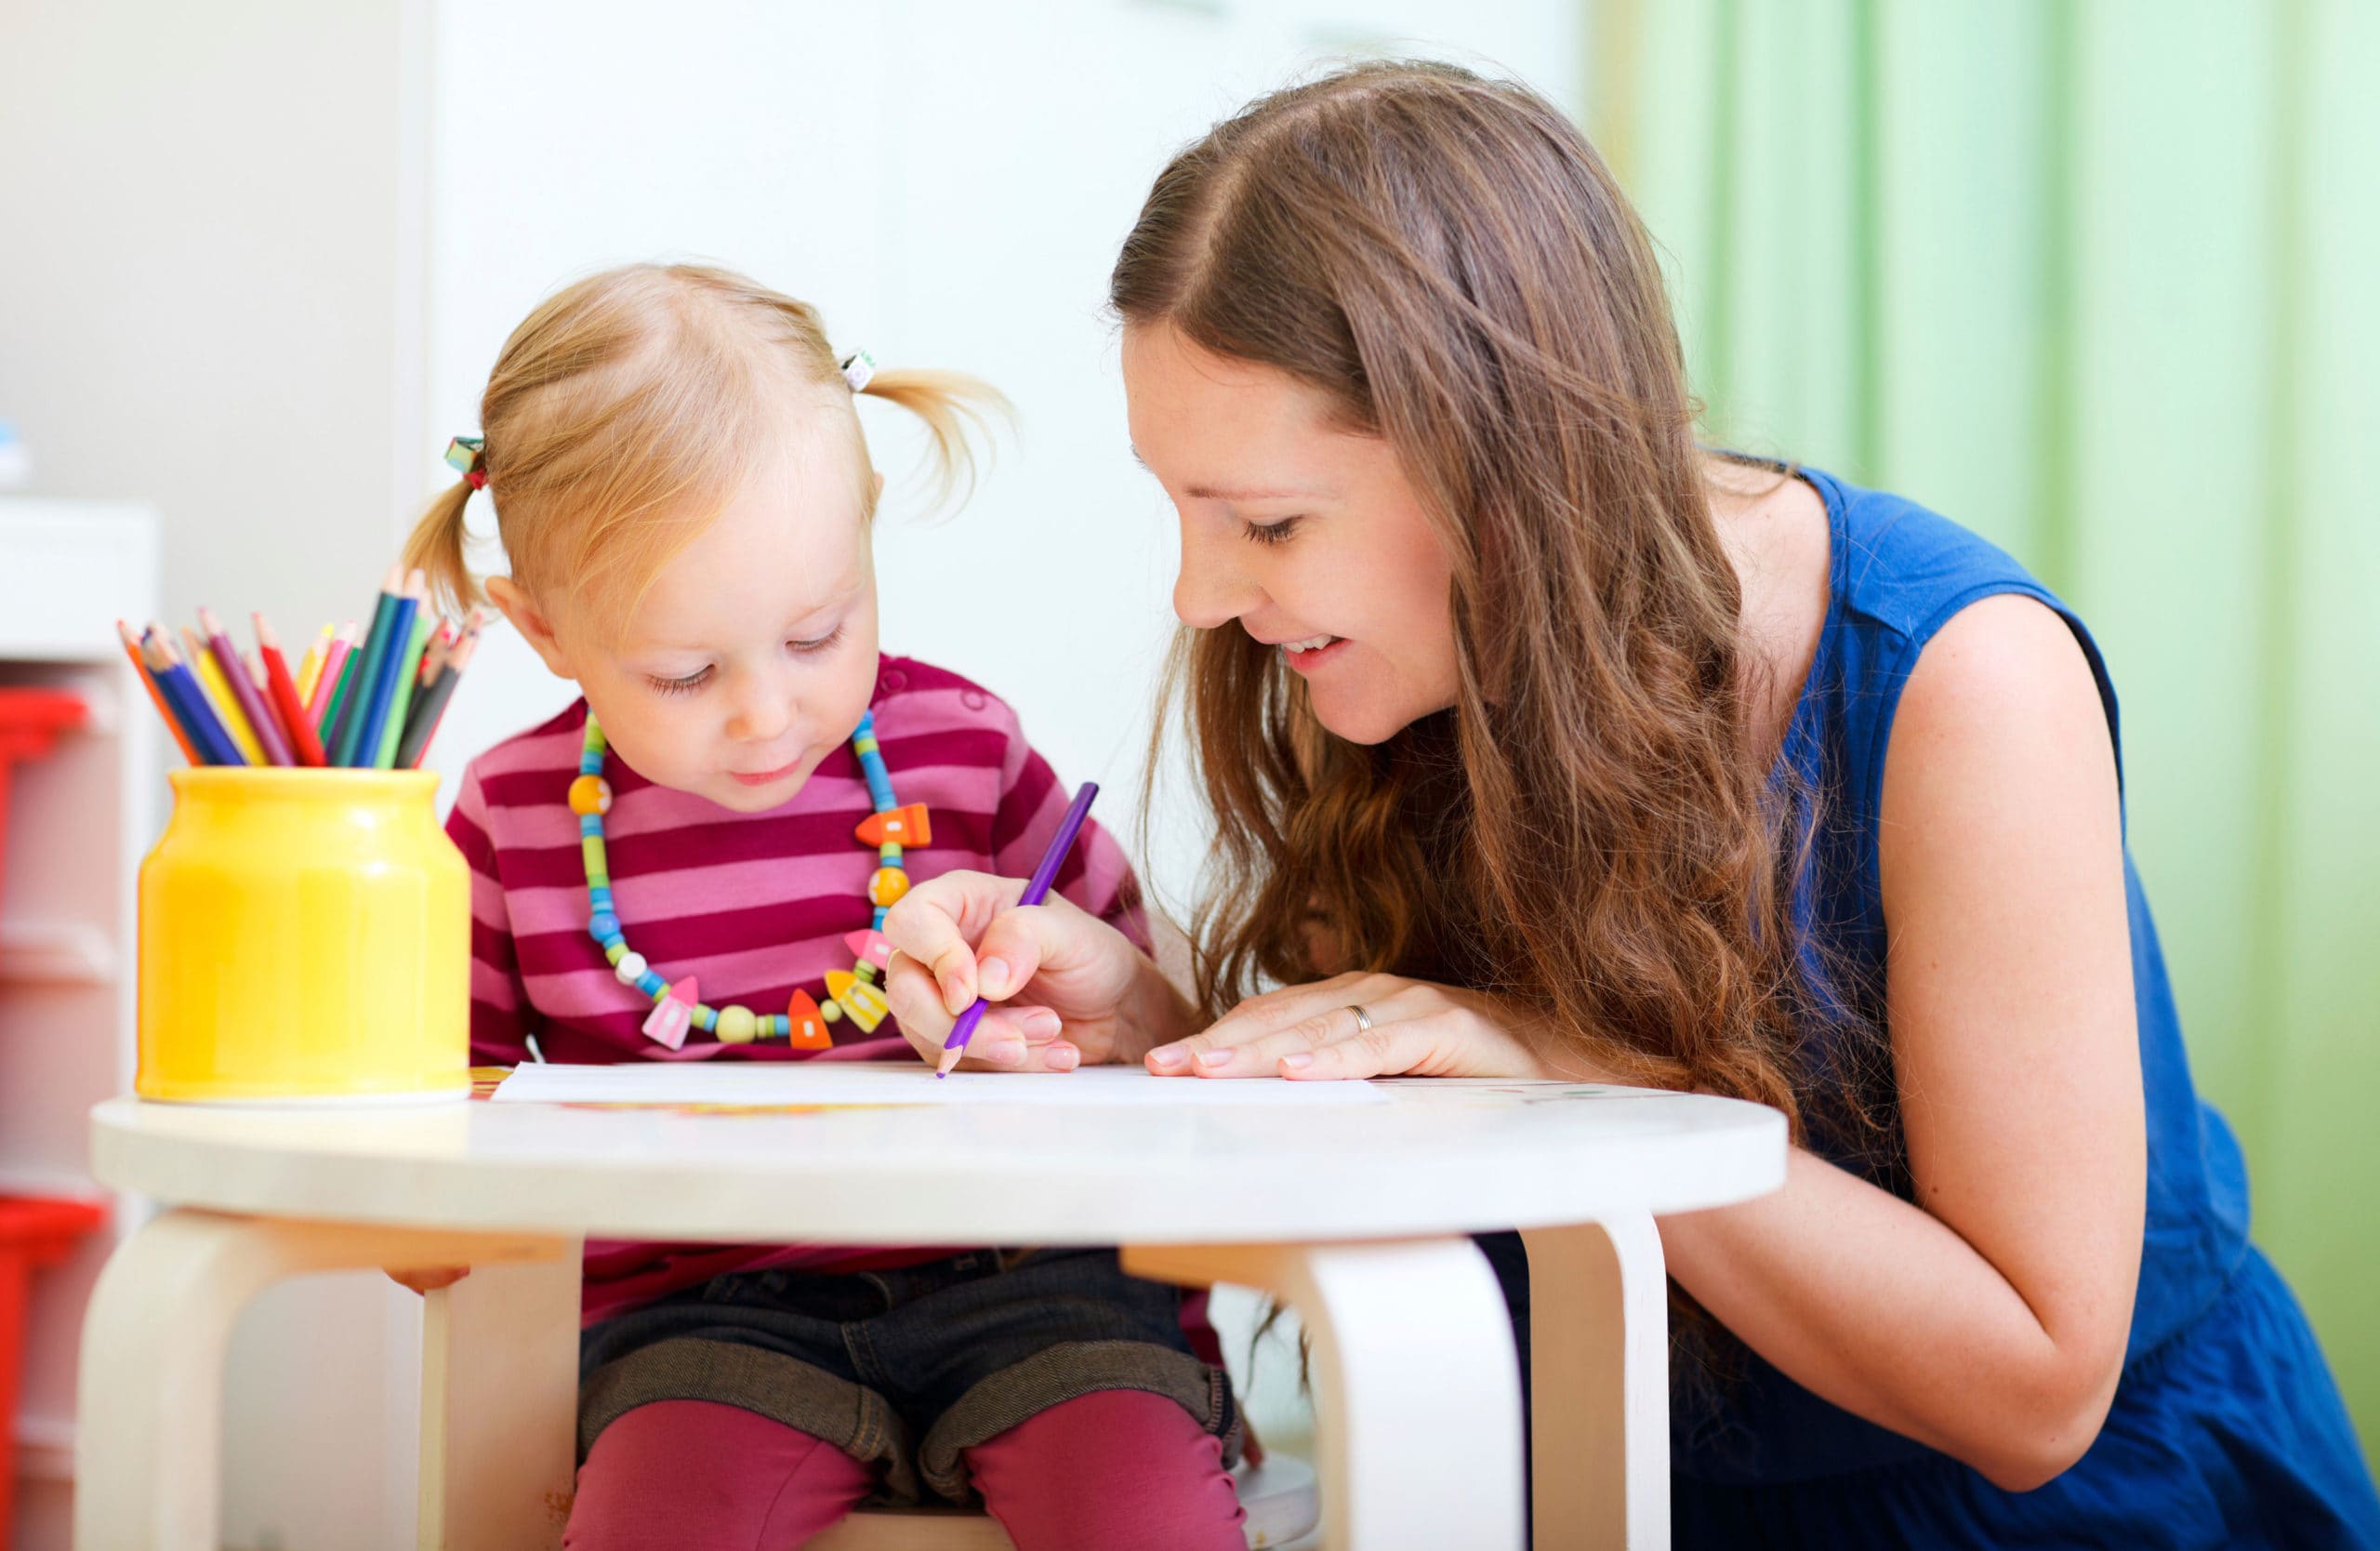 Why Should I Request a Reference for My Prospective Childcarer?